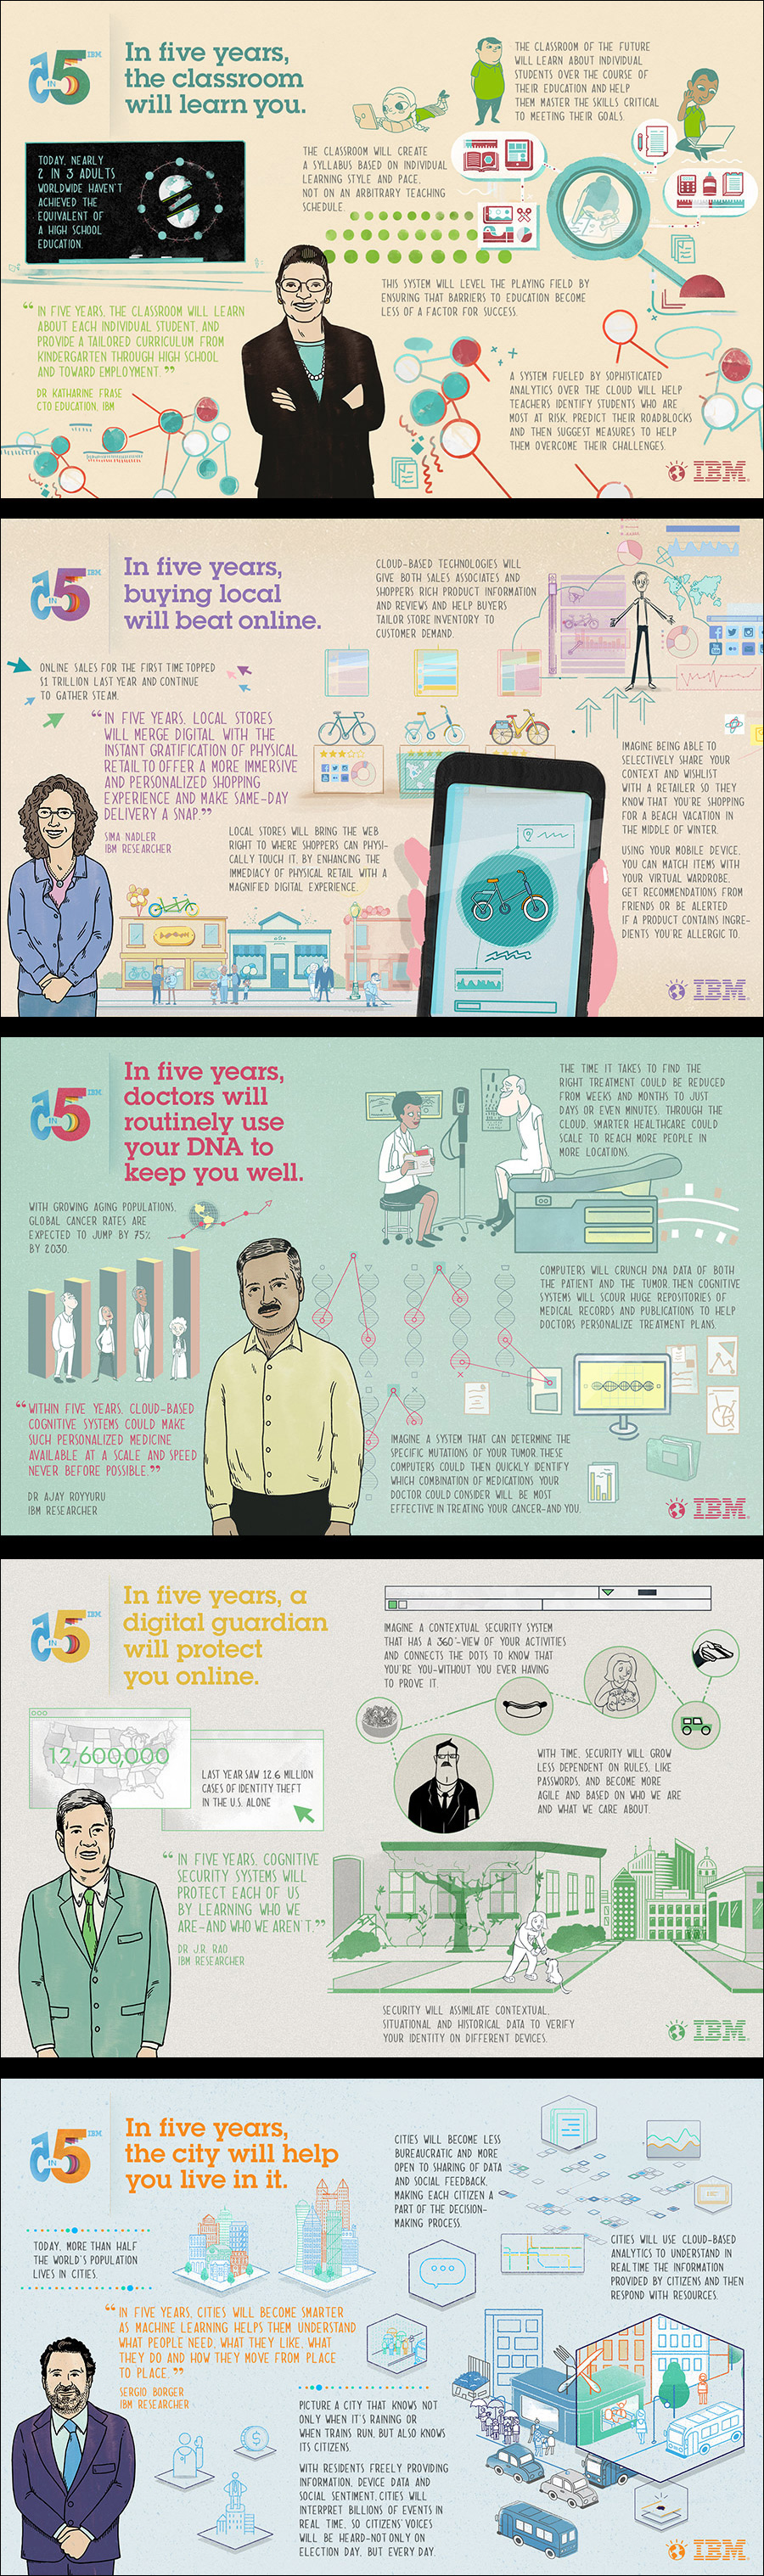 ibm-5-in-5-infographic